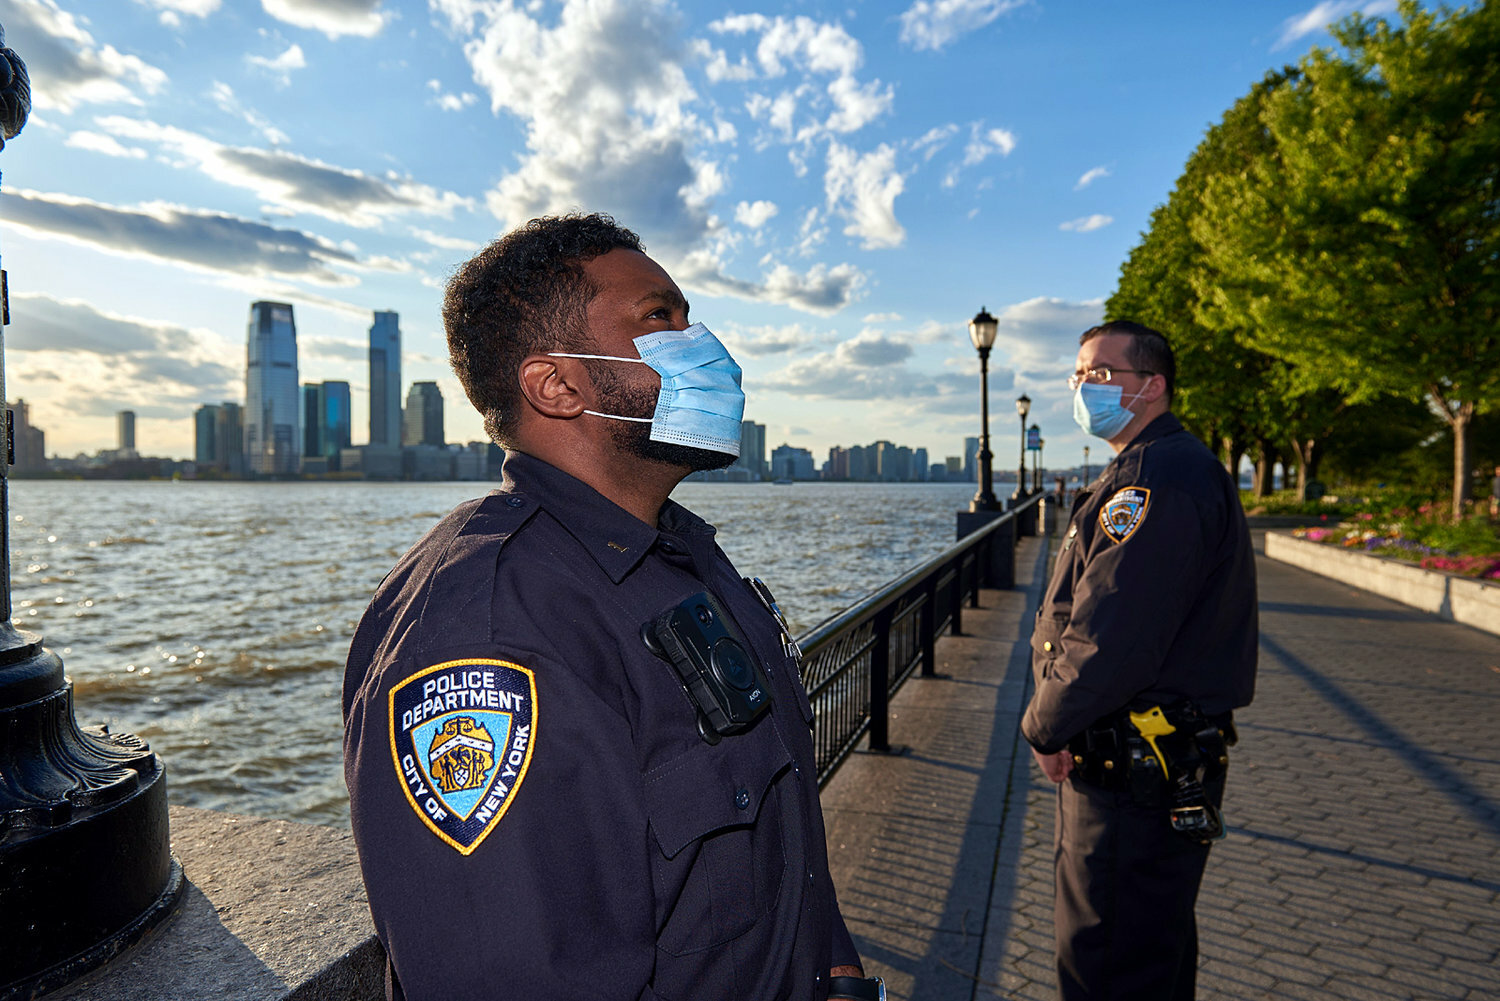 As millions were battened down in our homes, first responders, including NYPD officers, were seemingly everywhere. Some would say the onset of the pandemic, in 2020 and 2021, when the onset of Covid virtually shut the nation down, was their finest moment.